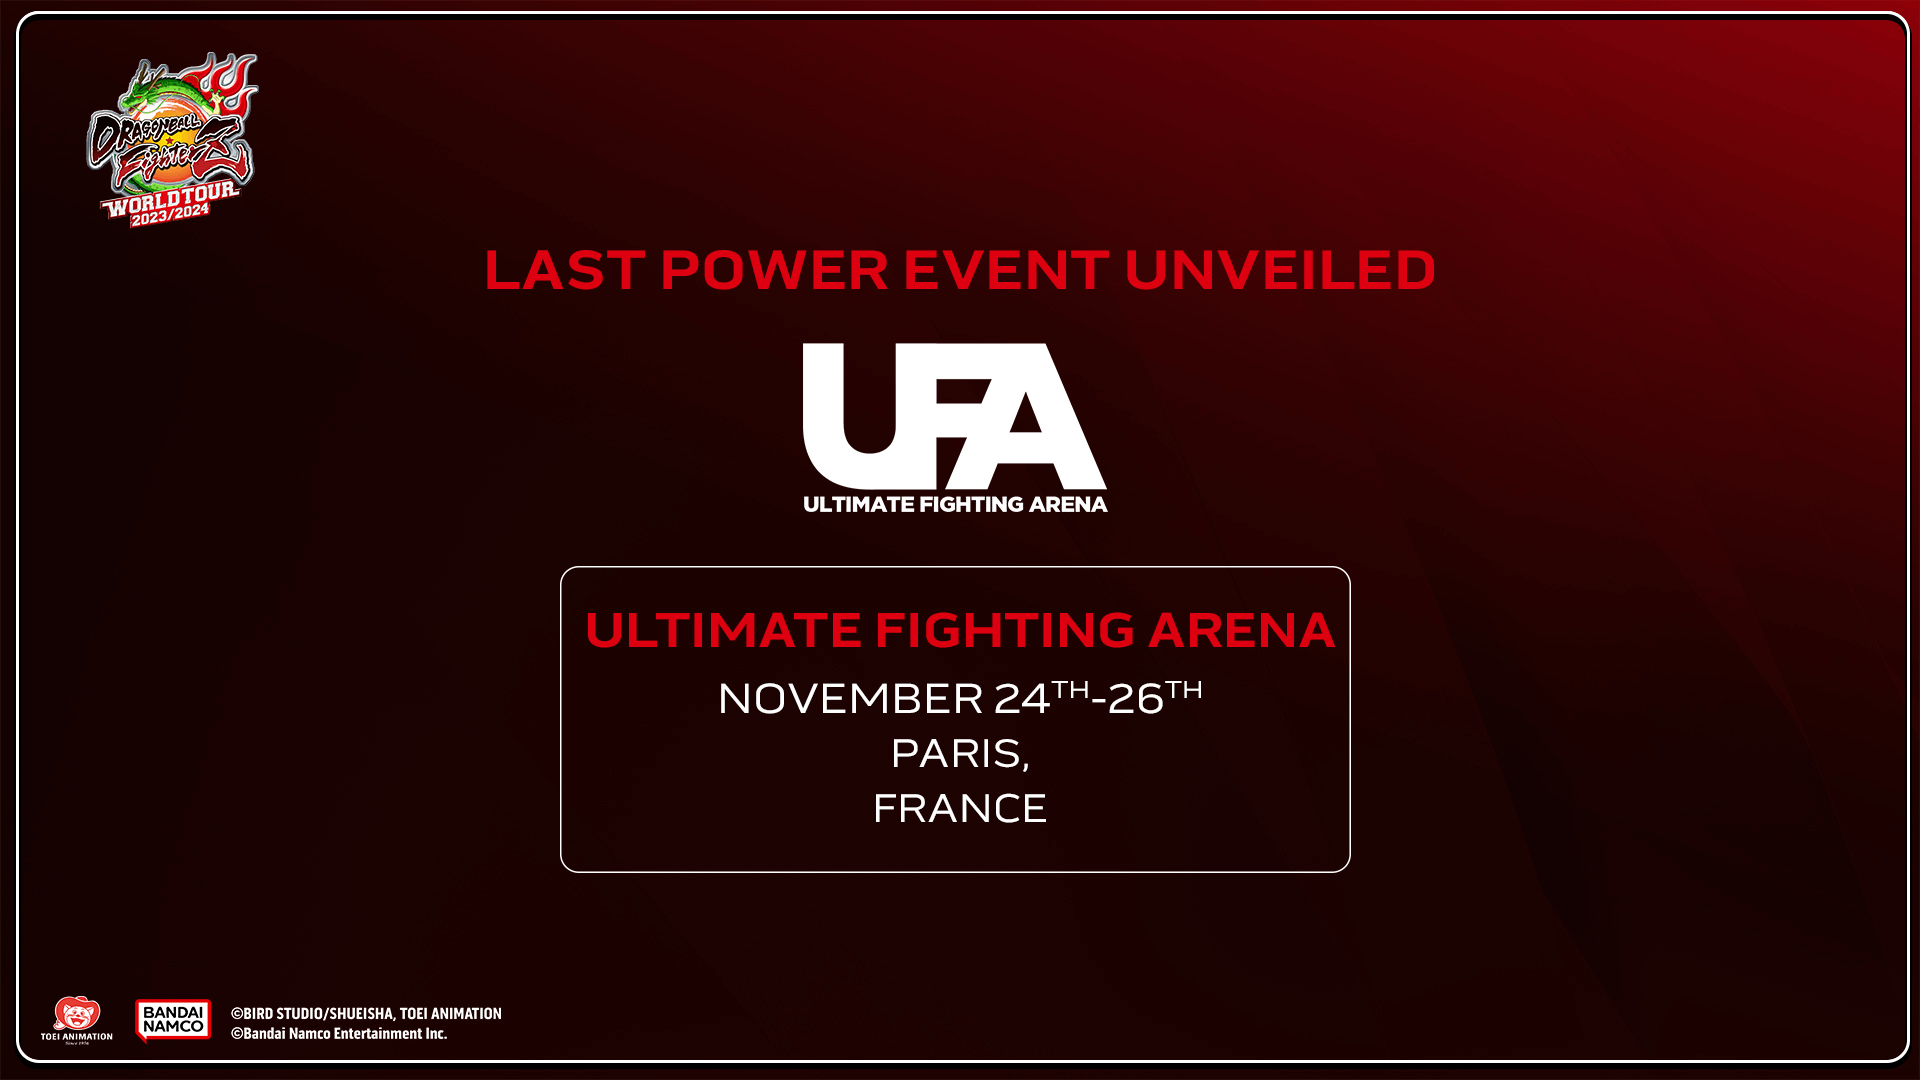 DBFZ World Tour 23/34 Last Stop Will be at UFA in Paris this November